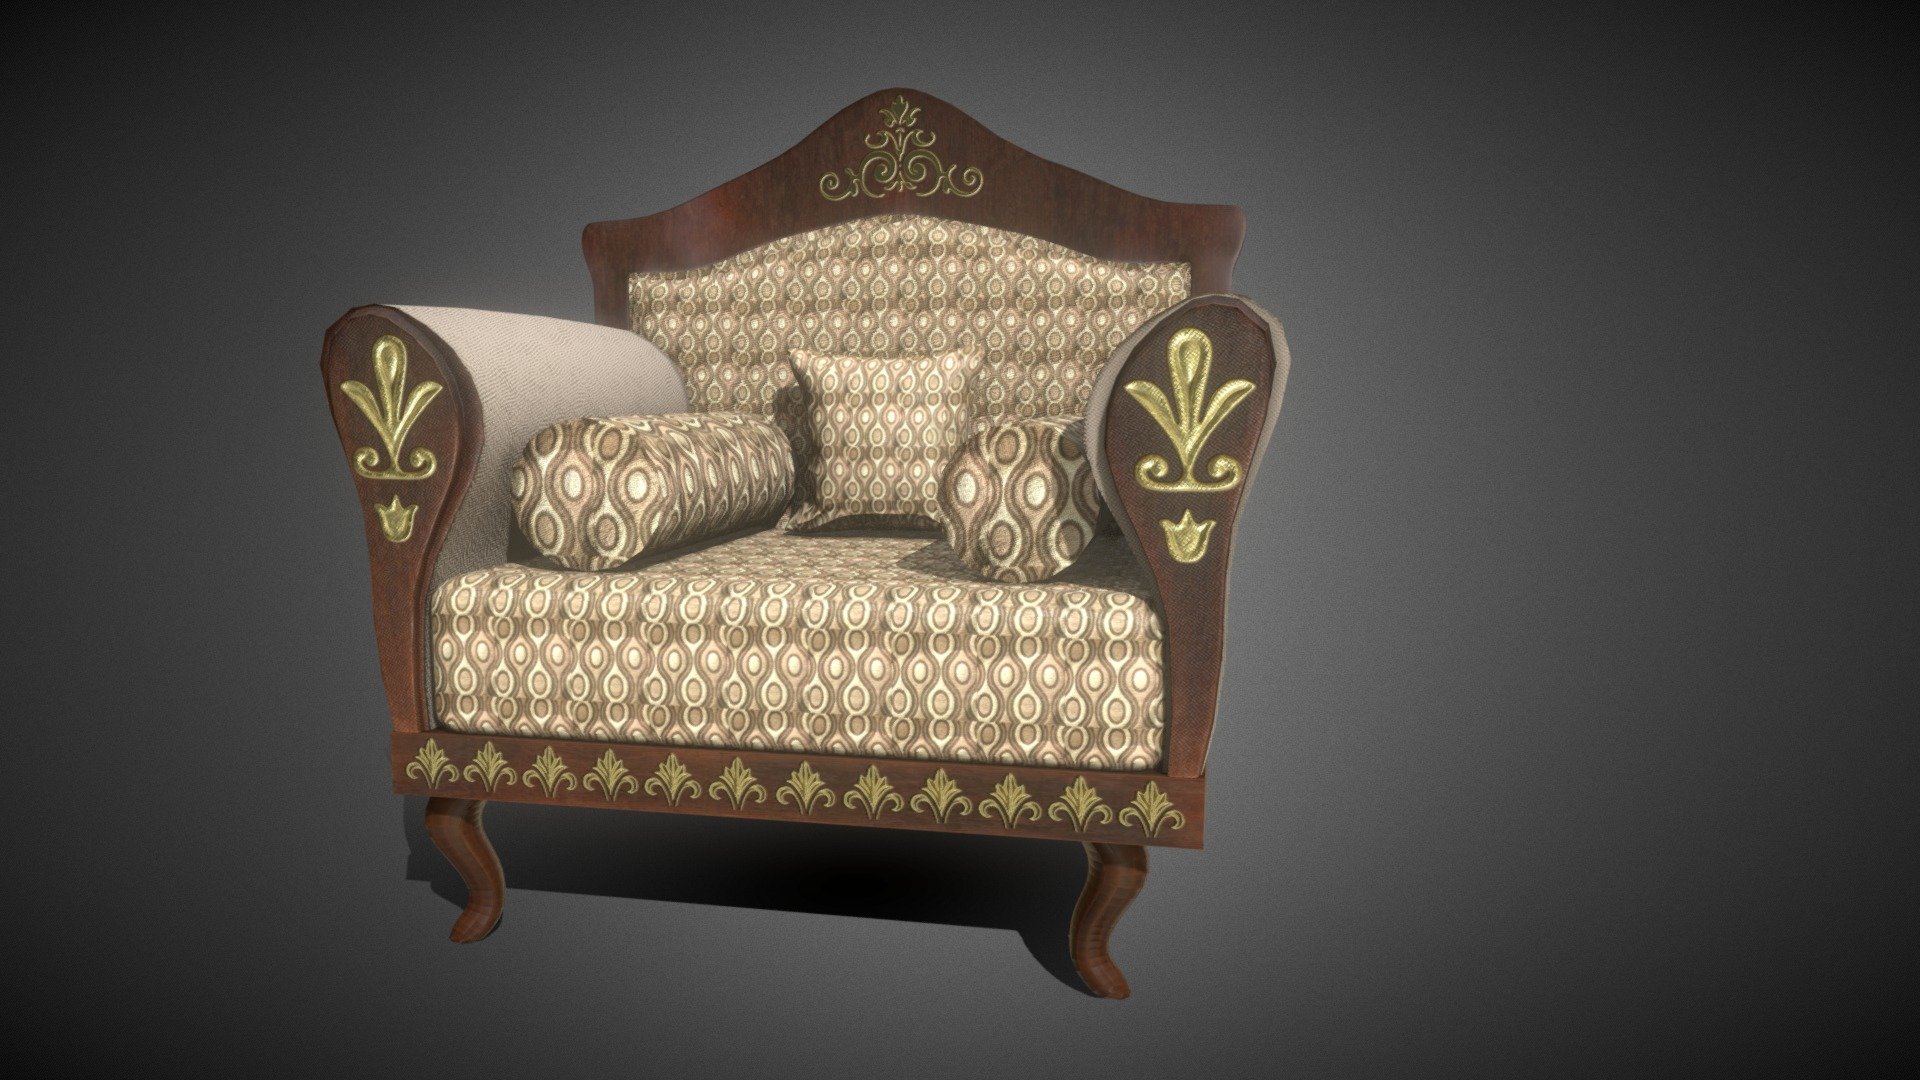 This is a digital 3d model of a Wingchair.

This model can be used for any themed render project, used either as a background prop, or as a closeup prop due to its high detail and visual quality.

This product will achieve realistic results in your rendering projects and animations, being greatly suited for close-ups due to their high quality topology and PBR shading 3d model